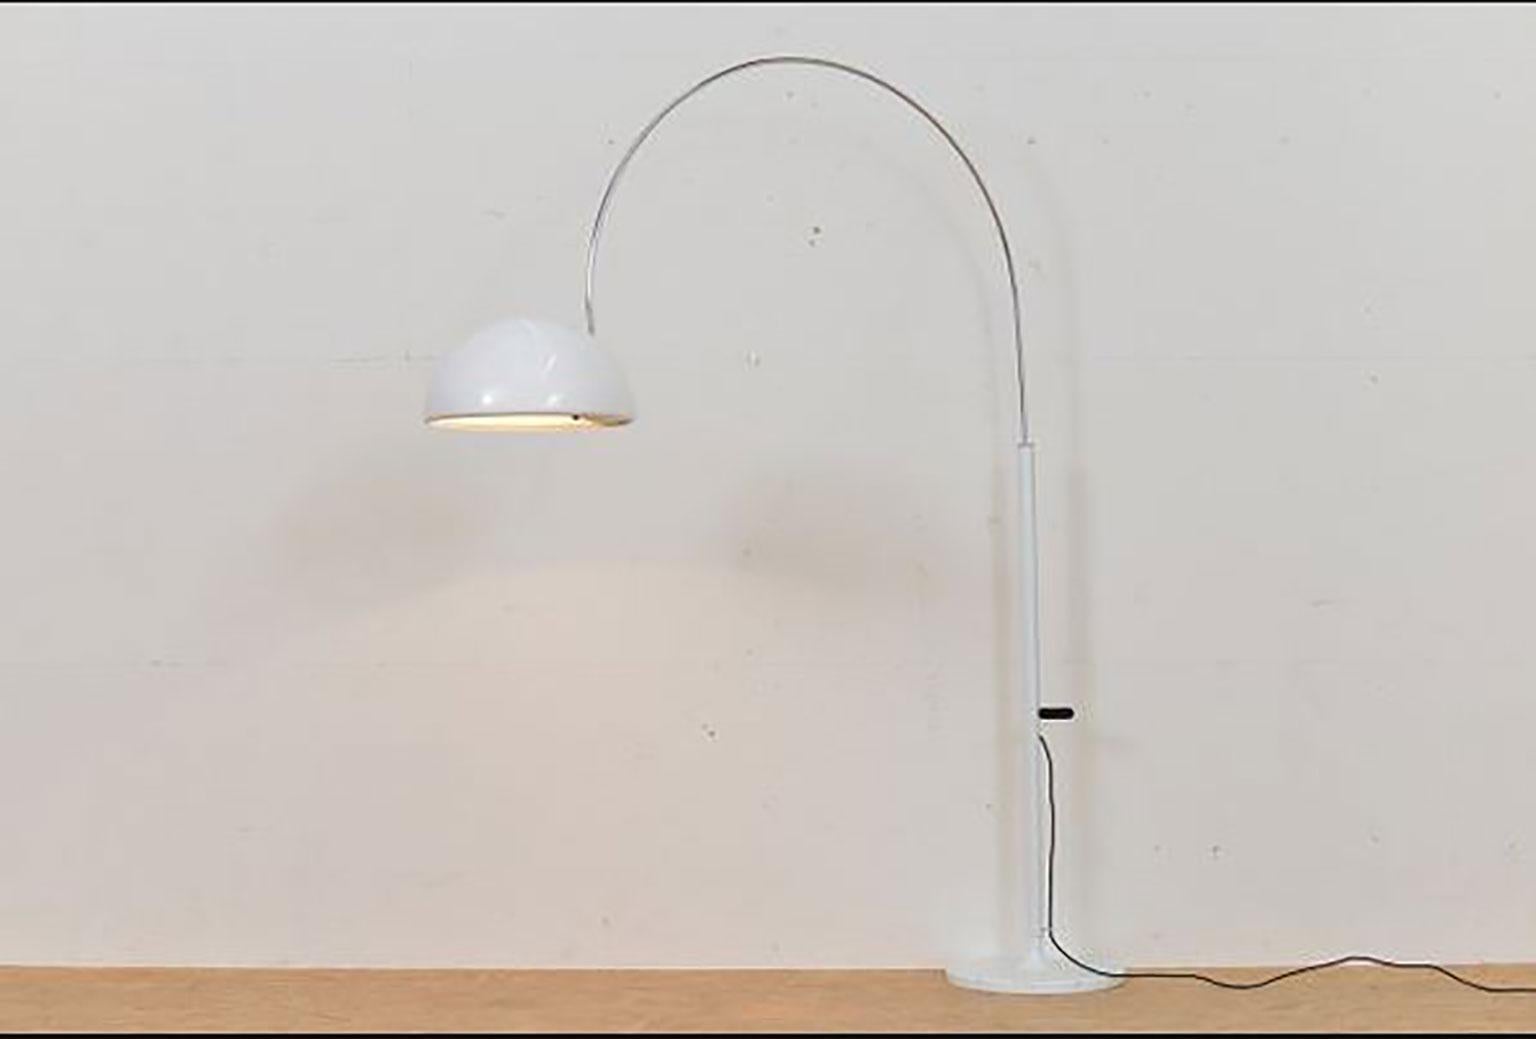 Coupe floor lamp (3320/R) designed by Joe Colombo for Oluce. The Coupe series of lamps is considered as a variation of the spider lamps. The simplistic and artistic mechanism that connects the stem to the head makes it possible to move the direction